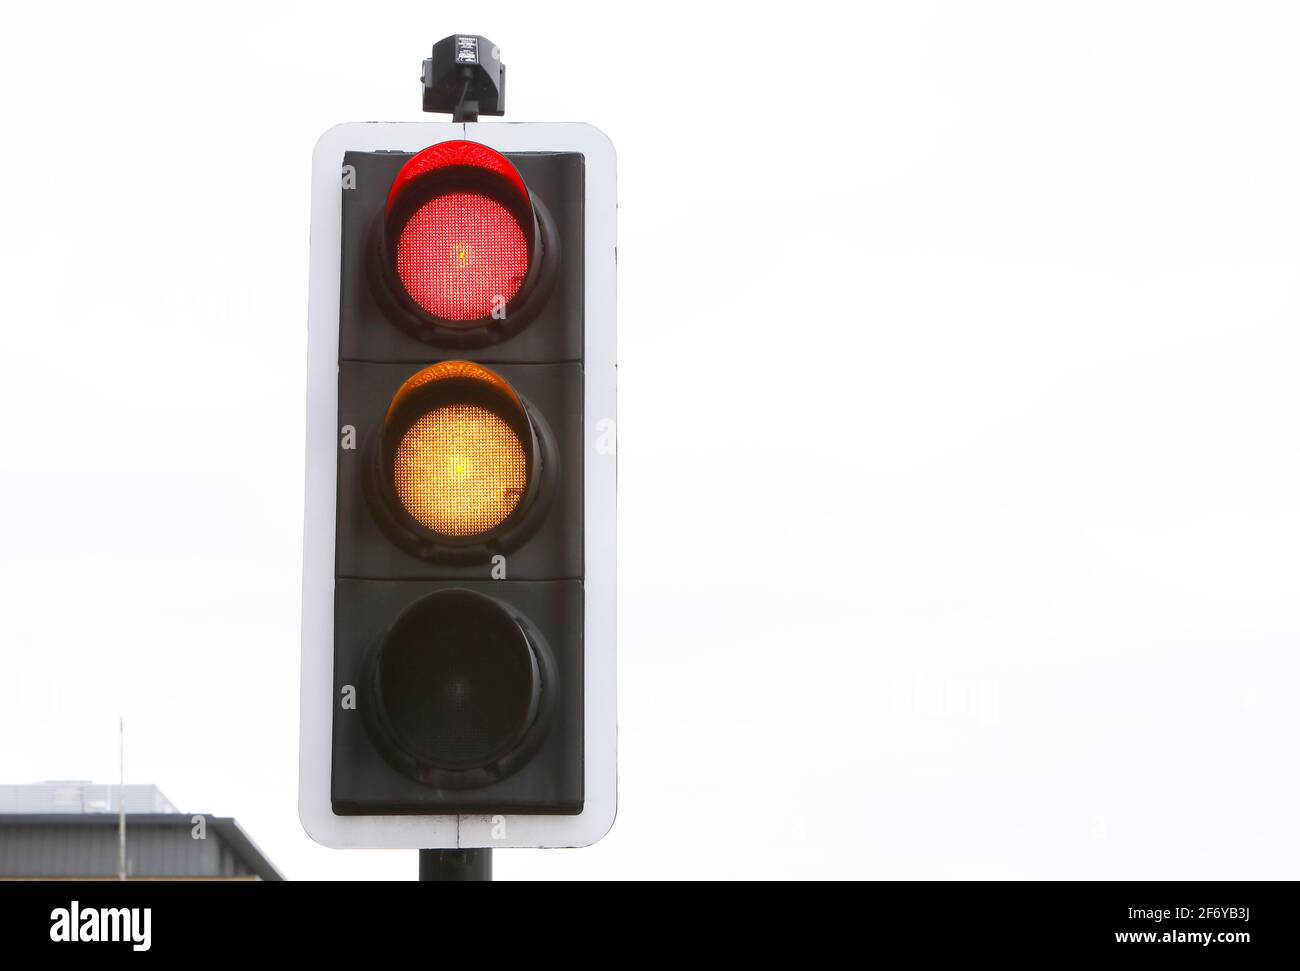 Traffic light changing from red to amber, UK Stock Photo